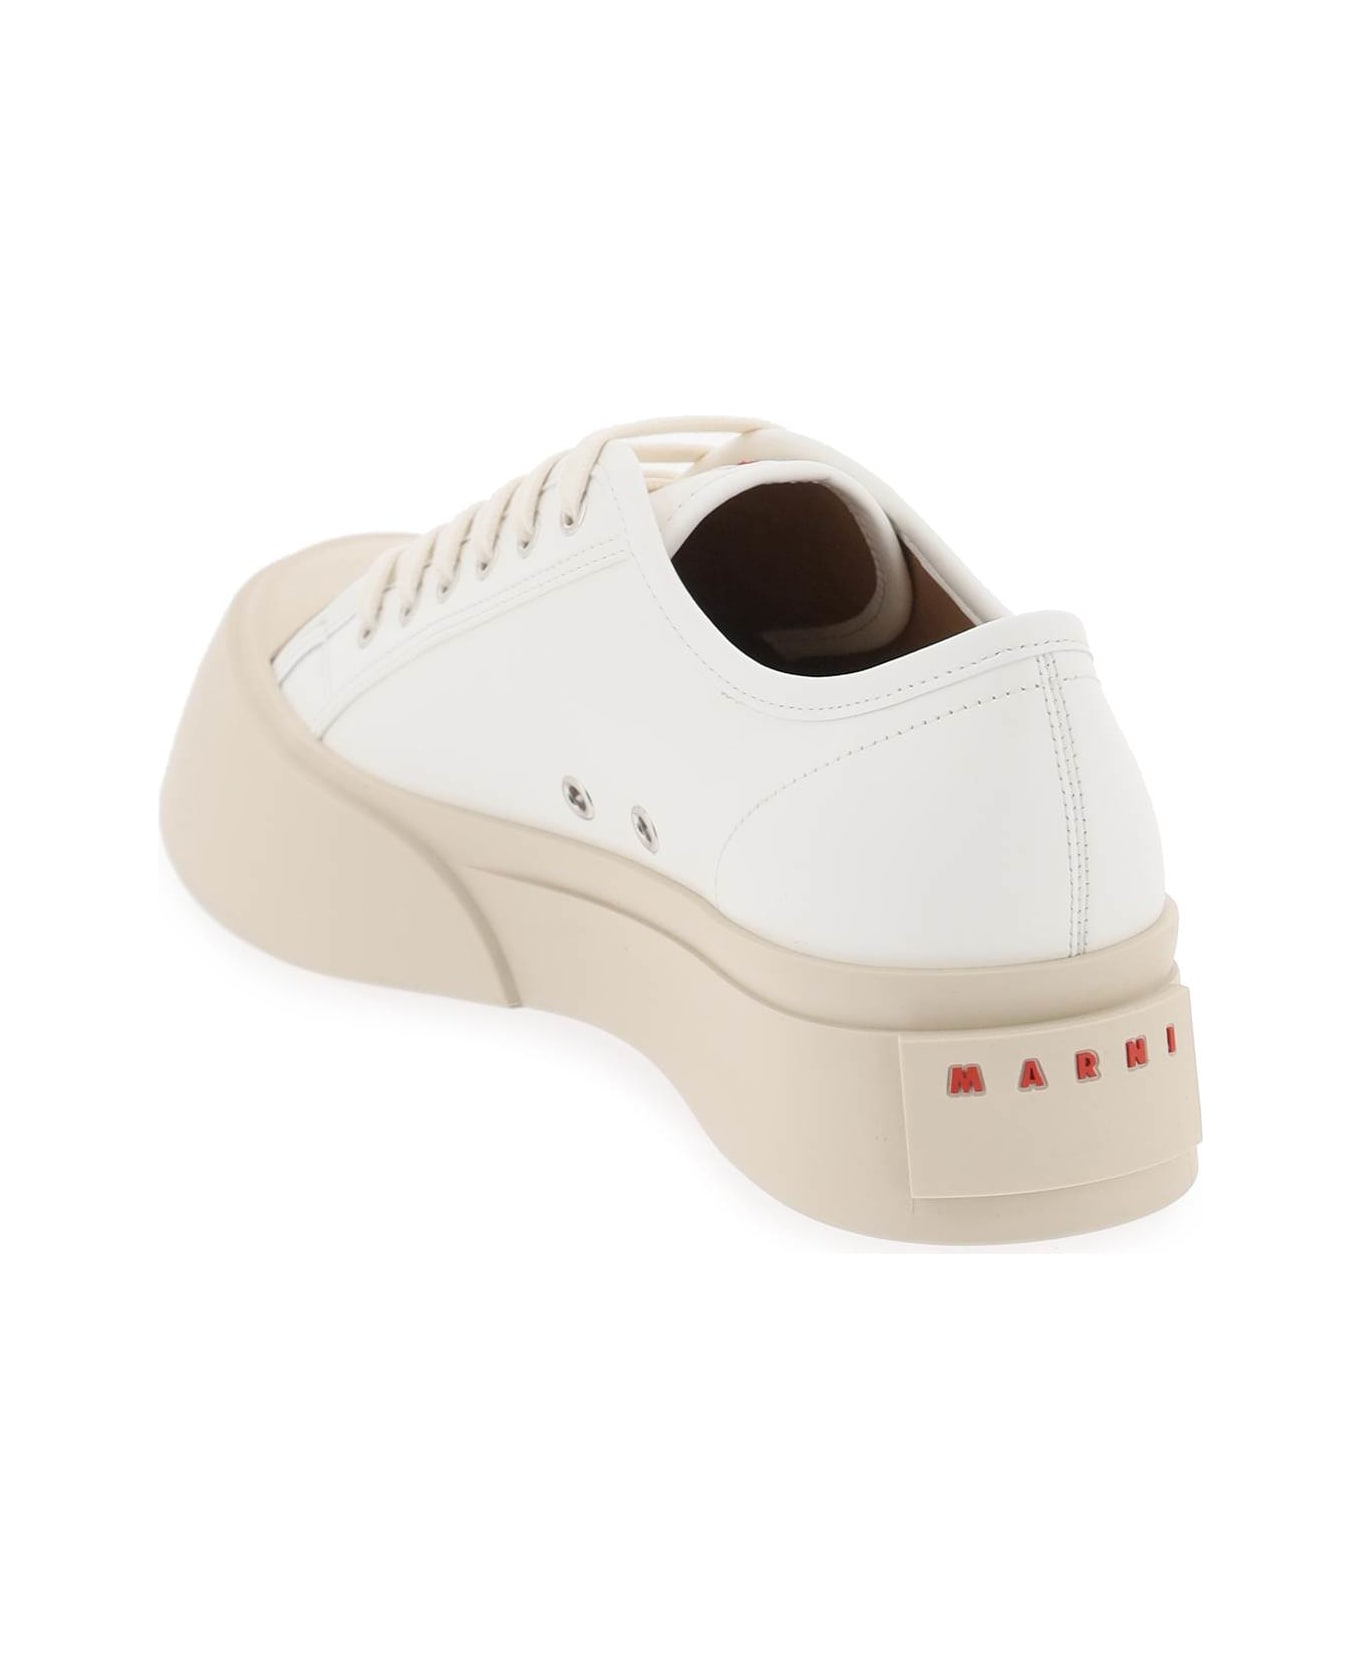 Marni Leather Pablo Sneakers - LILY WHITE (White) スニーカー